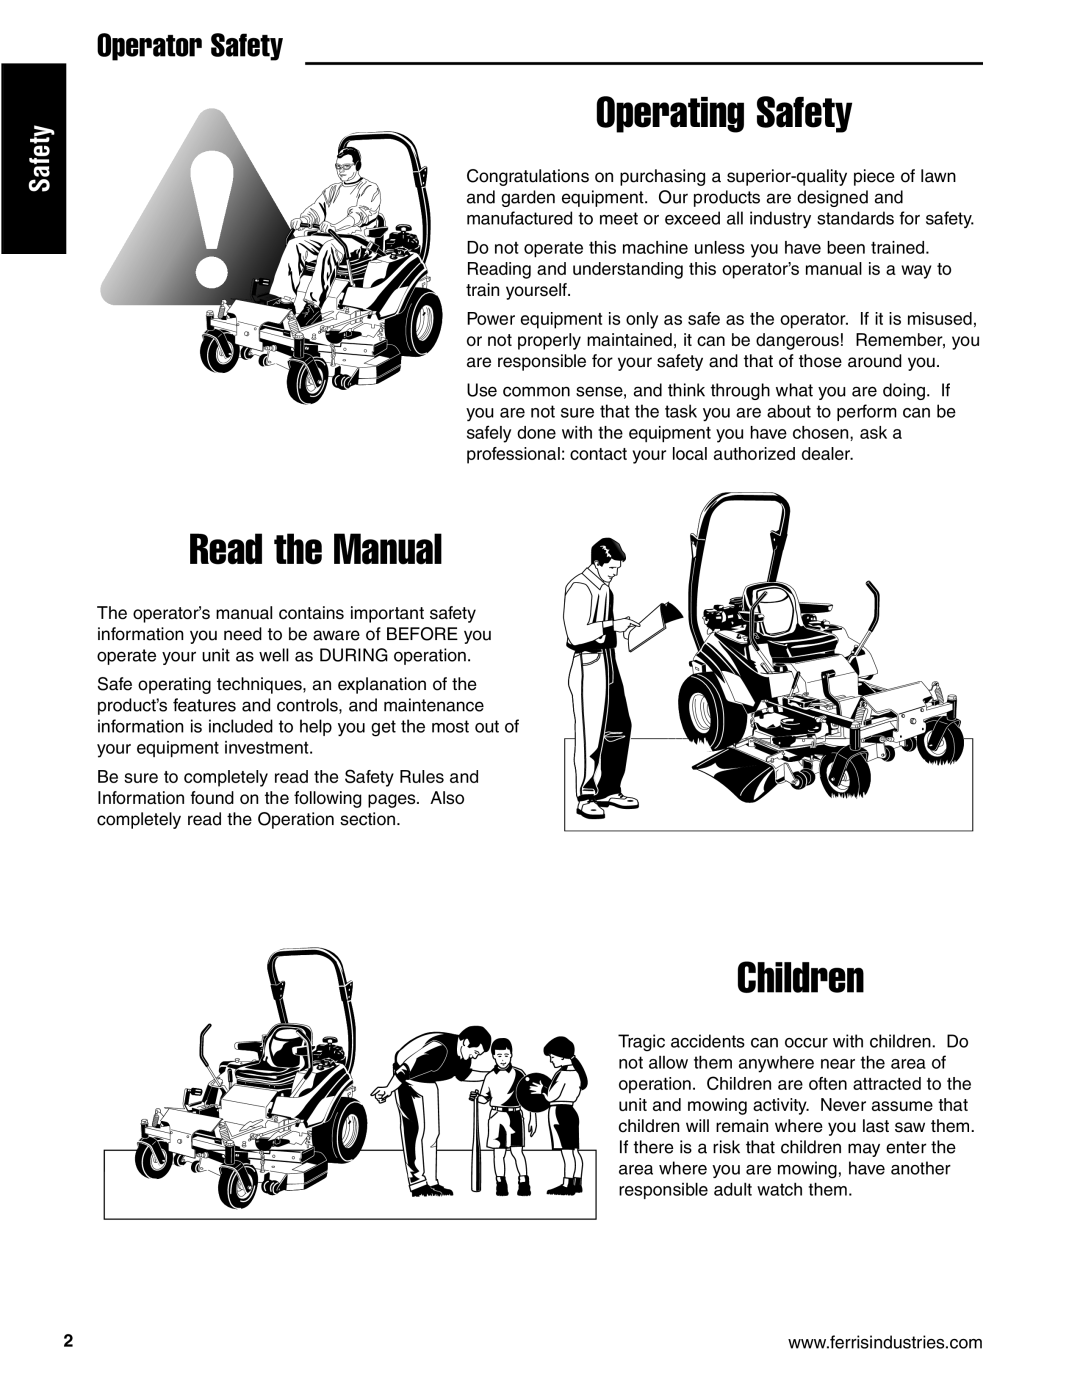 Briggs & Stratton 5900670, 5901170, 5900625, 5900629, 5900624 Operating Safety, Read the Manual, Children, Operator Safety 